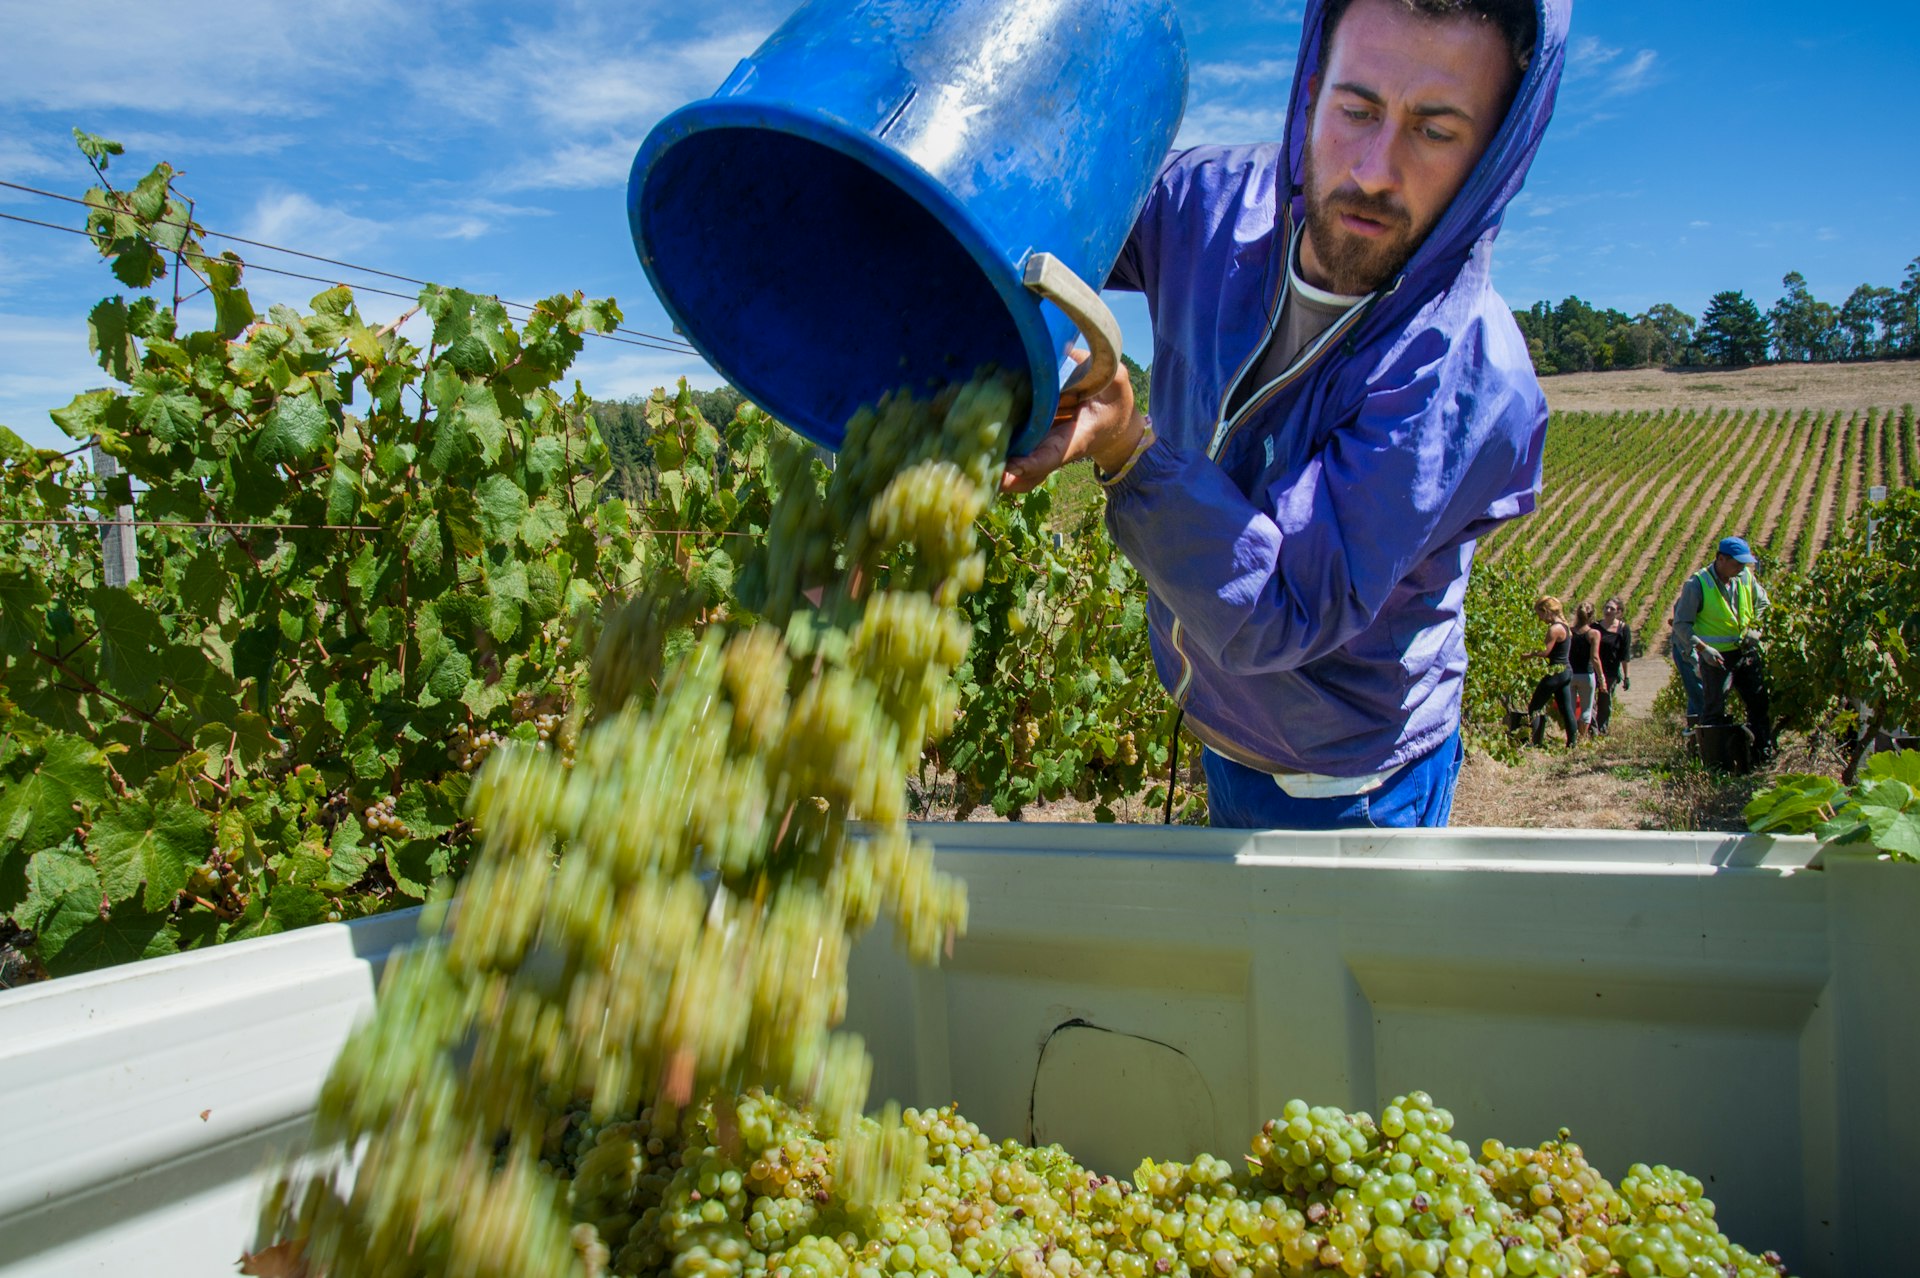 Harvest of Riesling wine grapes by temporary workers (often 'backpackers' on work holidays) in vineyard of the Adelaide Hills